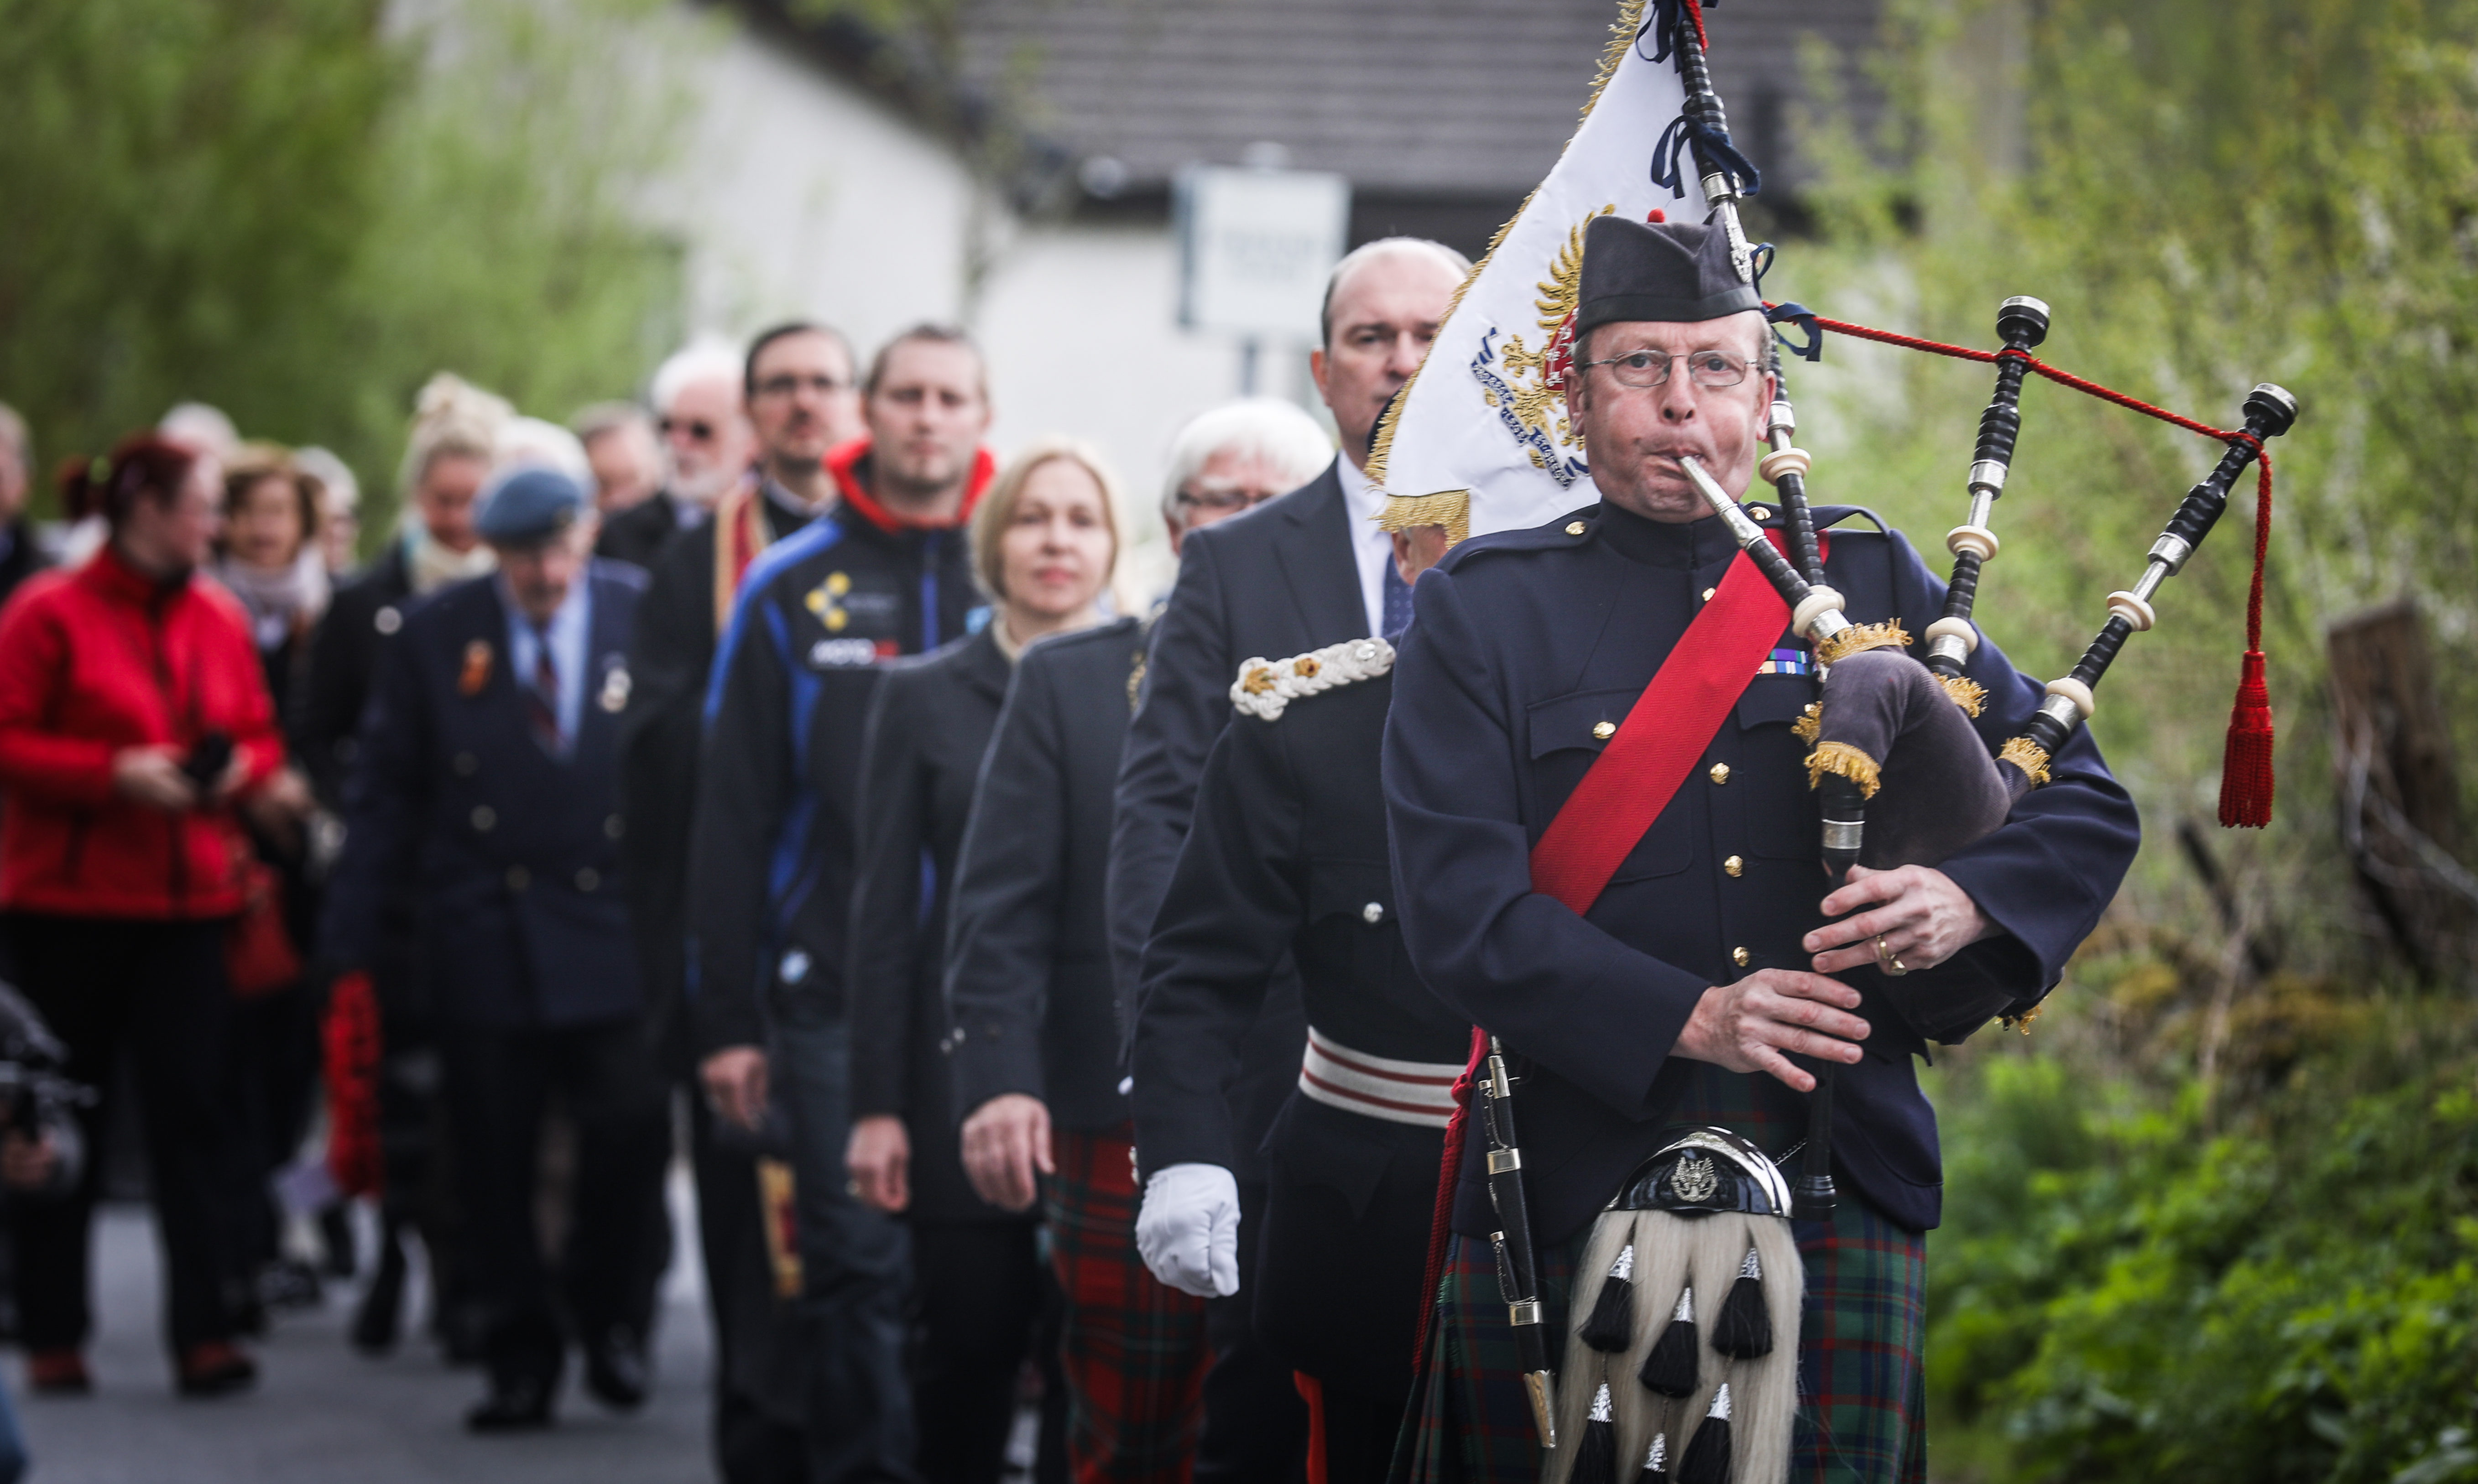 A ceremony for four Airmen (3 Russian, 1 Czech) who died in a plane crash during WW2 at Fearnan, Perthshire. The ceremony, which was filmed for Russian TV, began with a piper-led walk to the accident site.
All pictures by Mhairi Edwards.